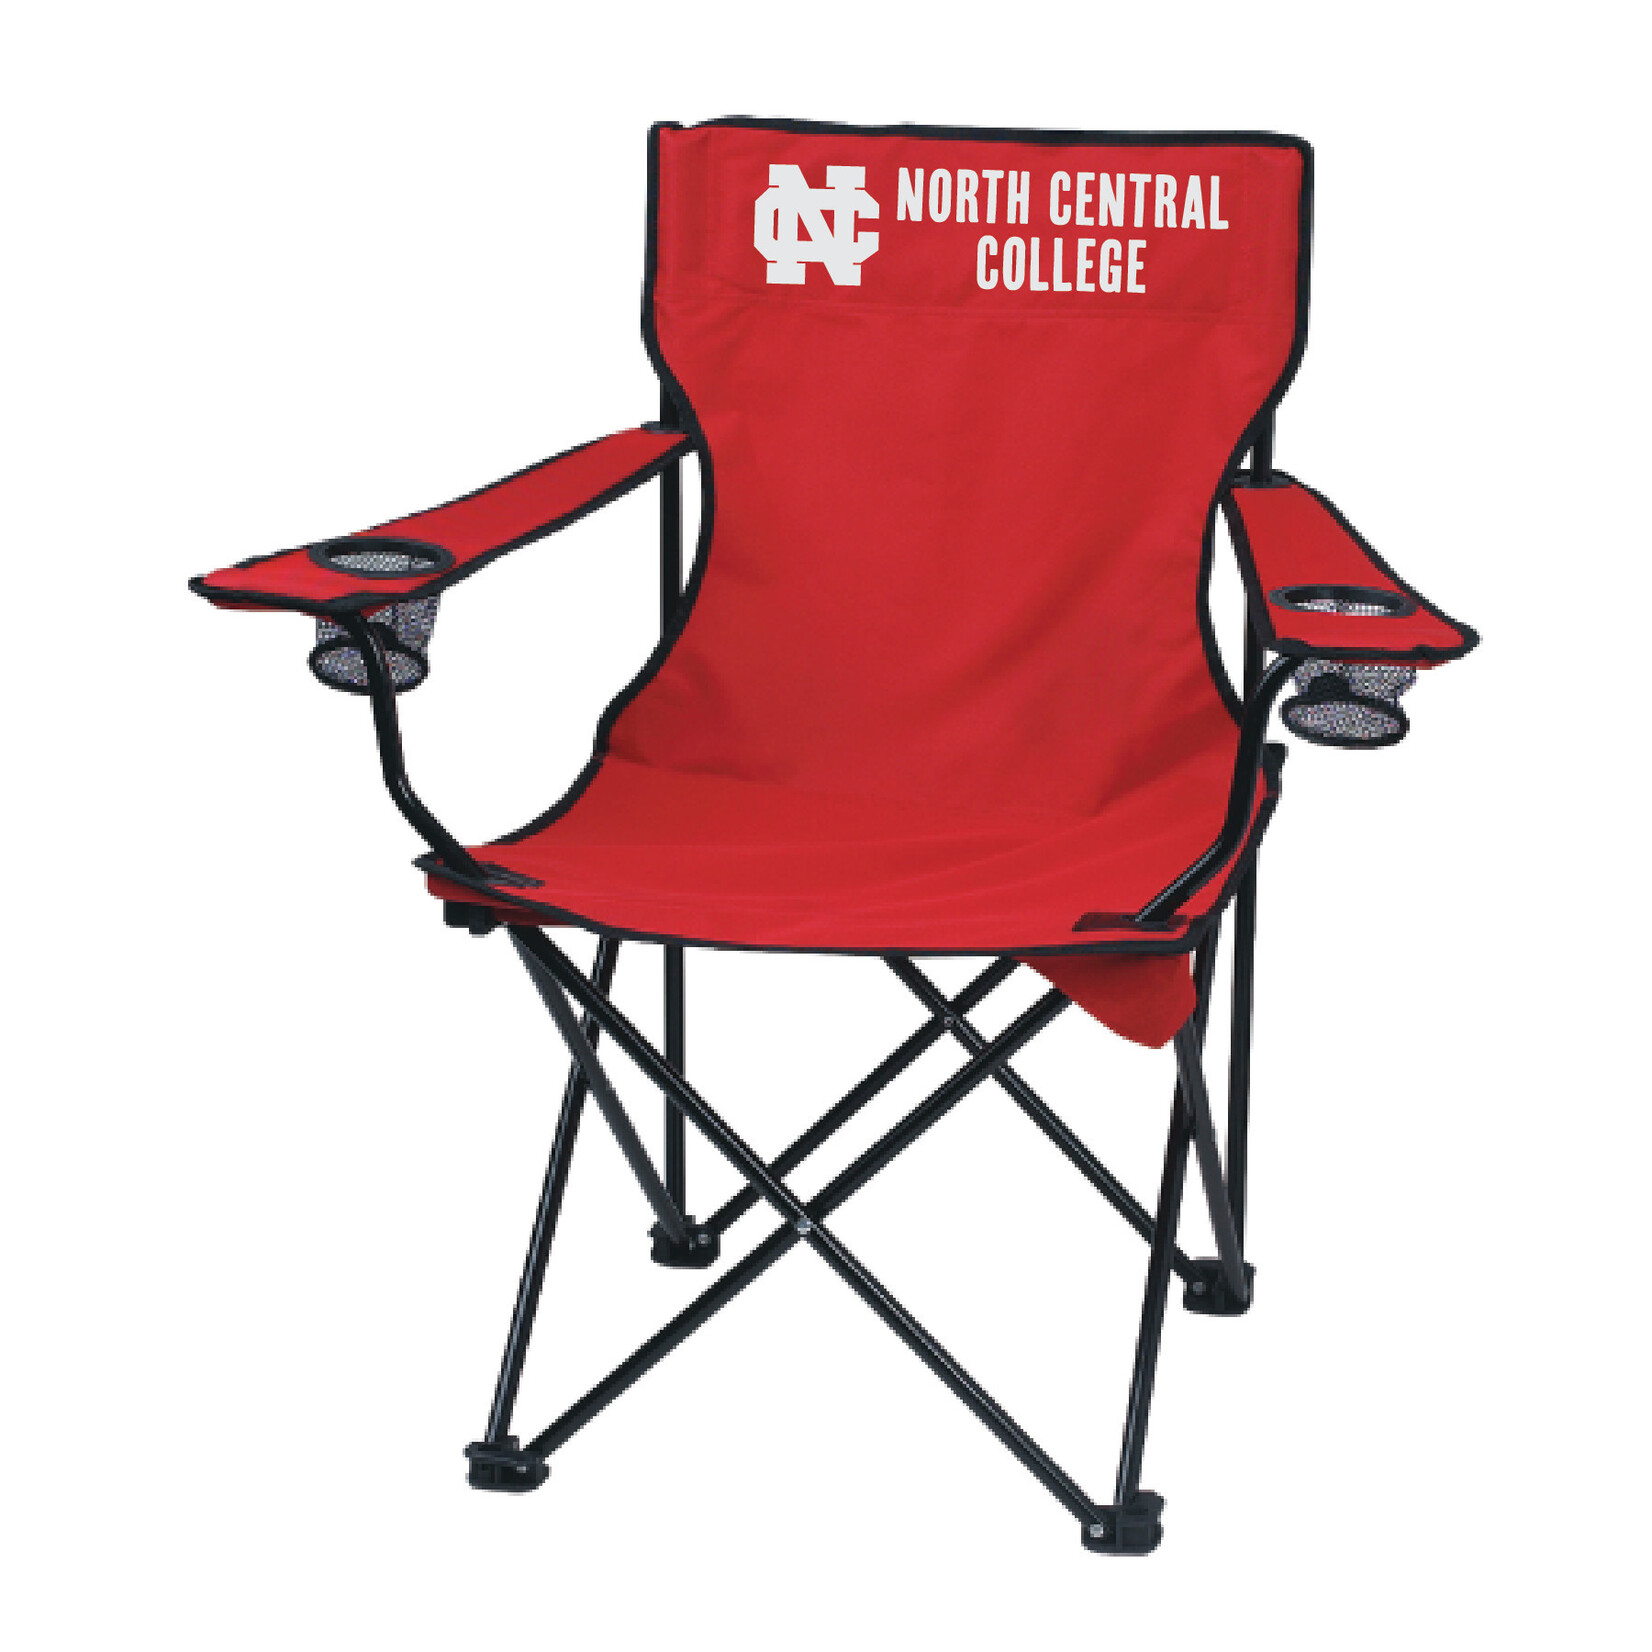 Neil Enterprises North Central College Folding Chair - Red